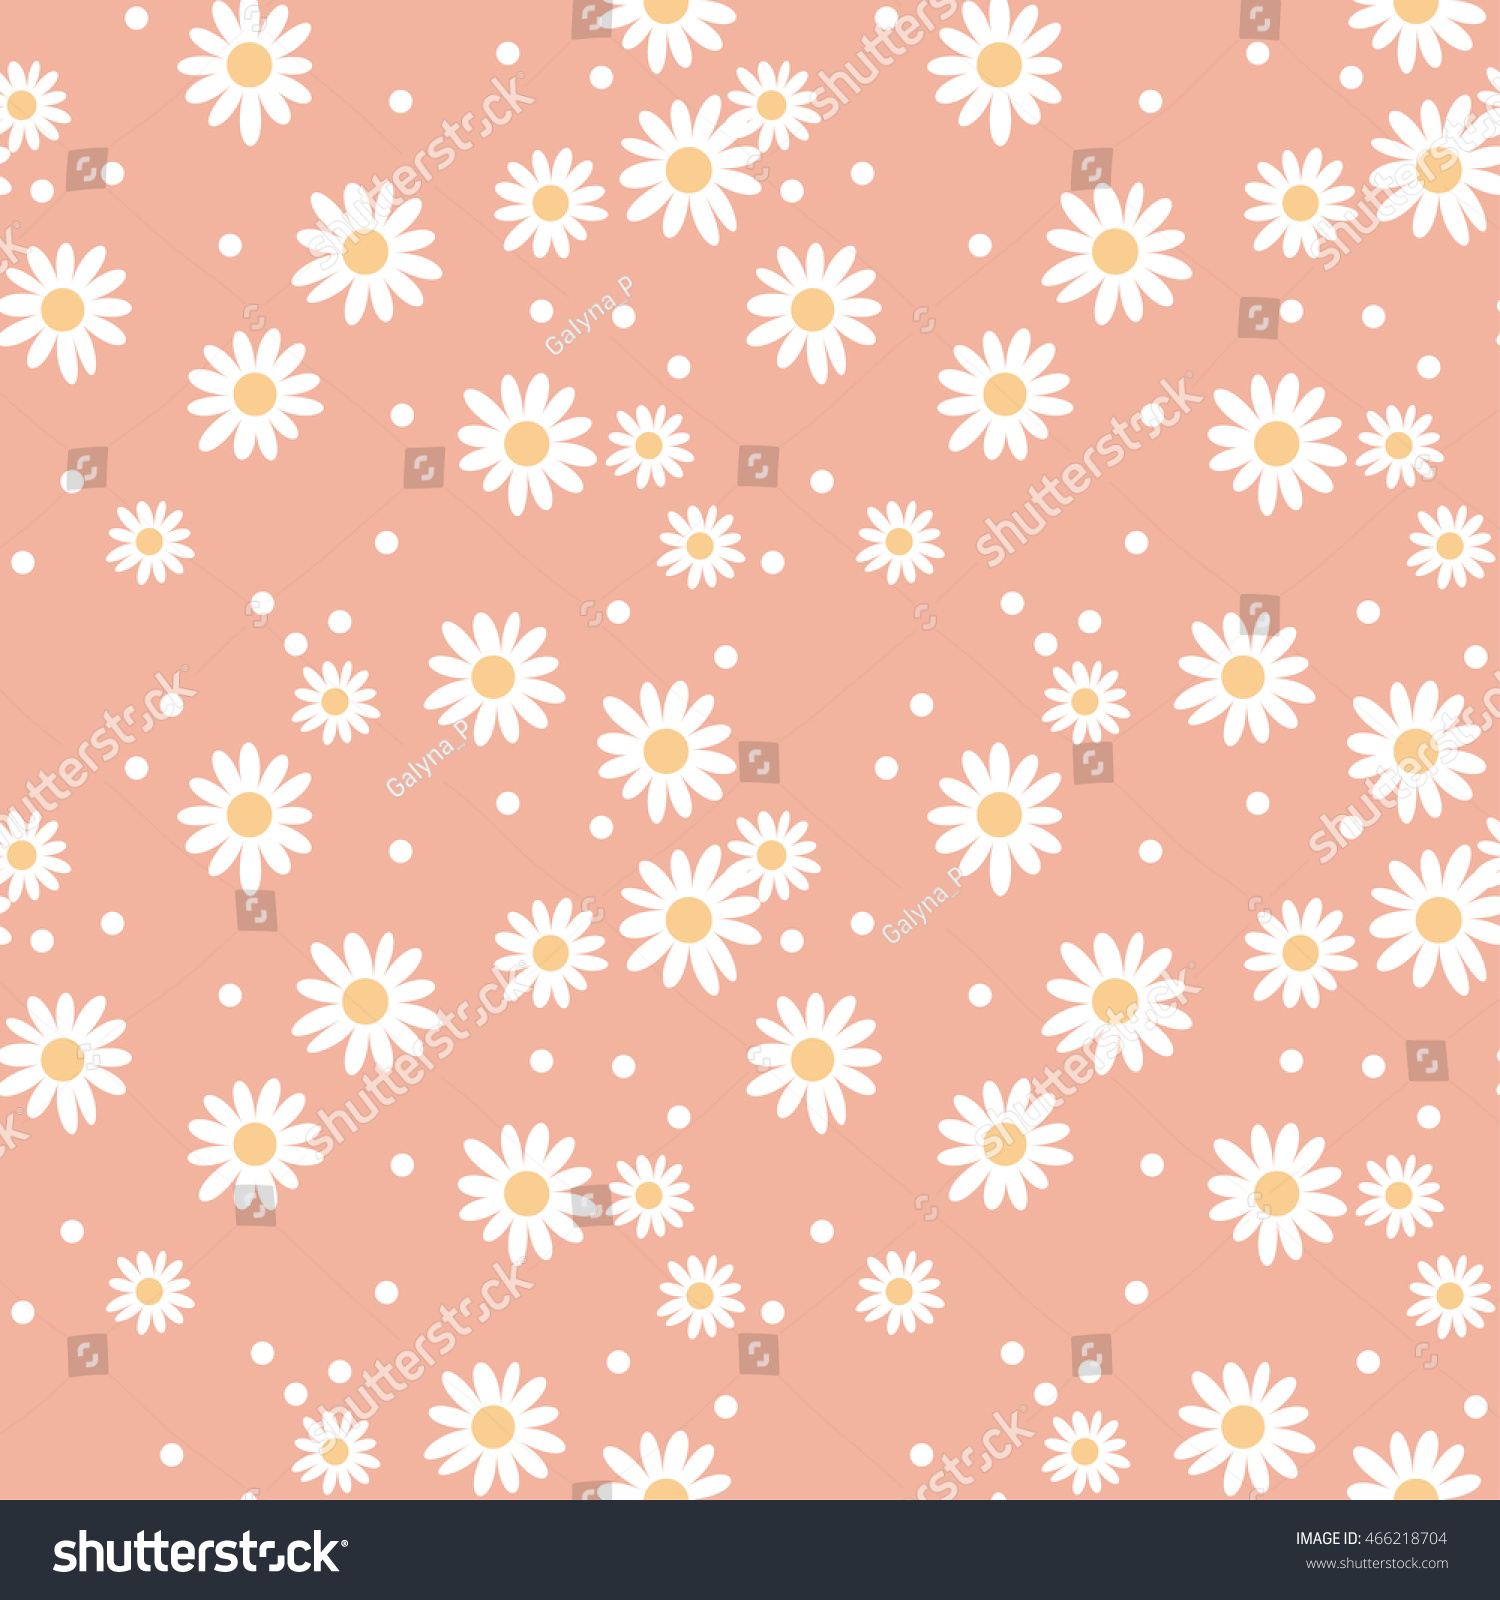 Daisy Cute Seamless Pattern Floral Retro Stock Vector (Royalty Free ...